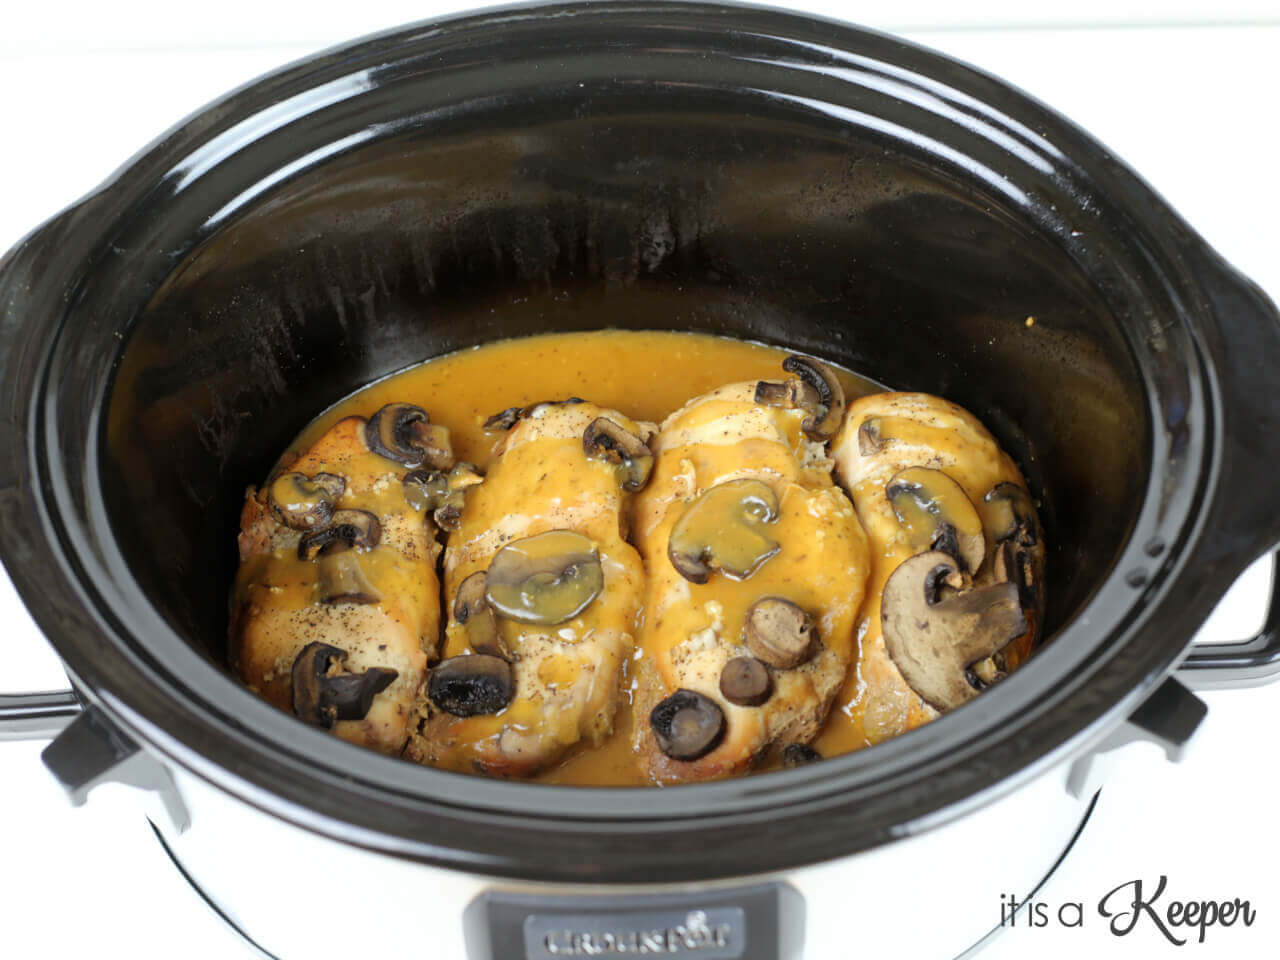 Slow Cooker Chicken Marsala - This is one of my favorite easy crock pot recipes